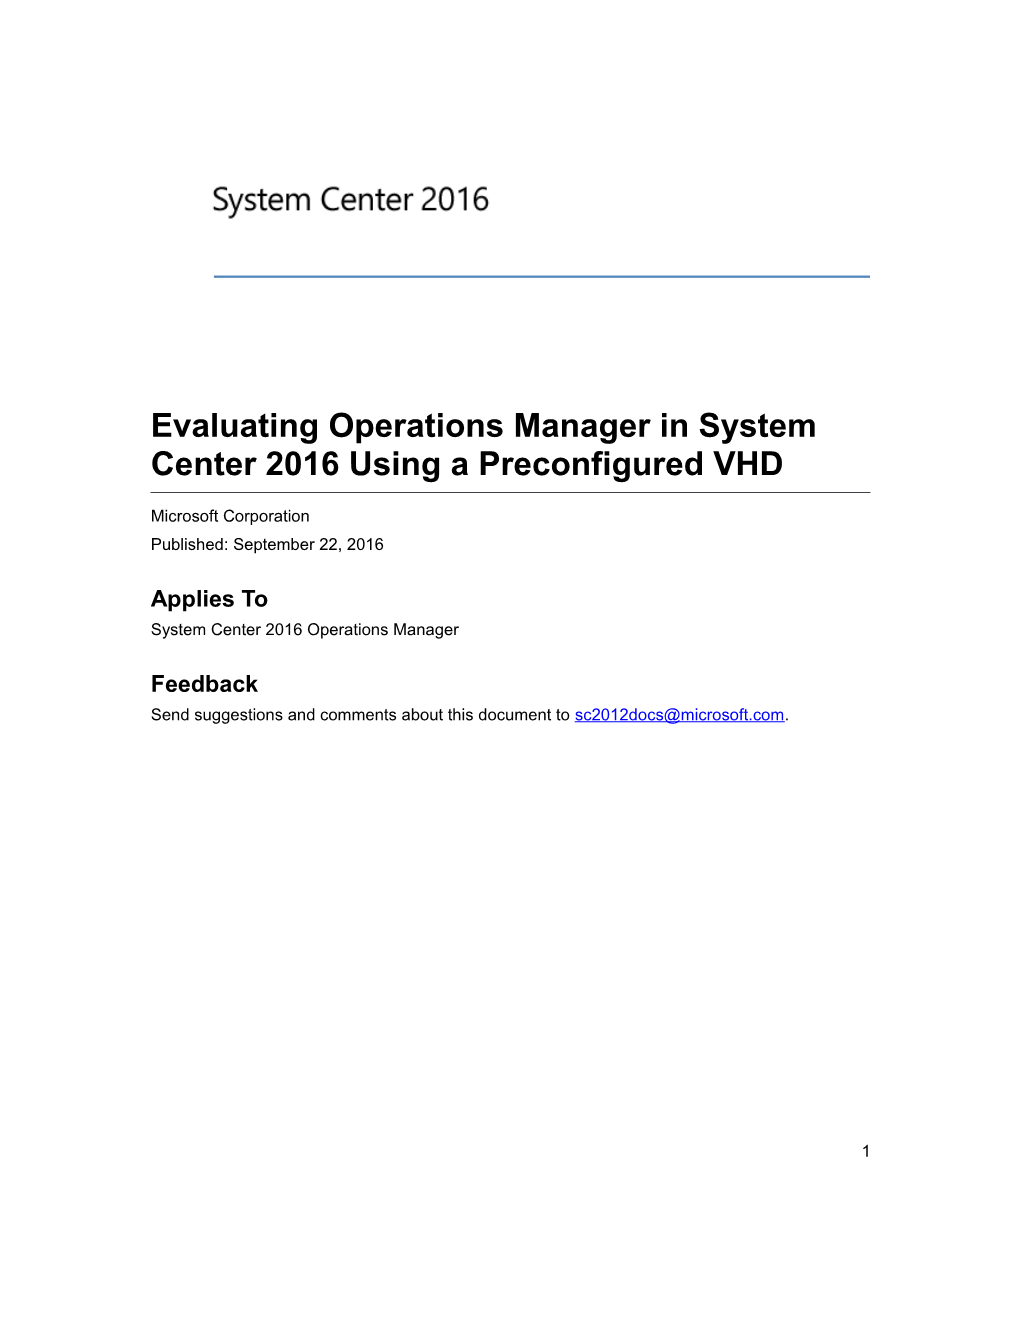 Evaluating Operations Manager in System Center 2016 Using a Preconfigured VHD